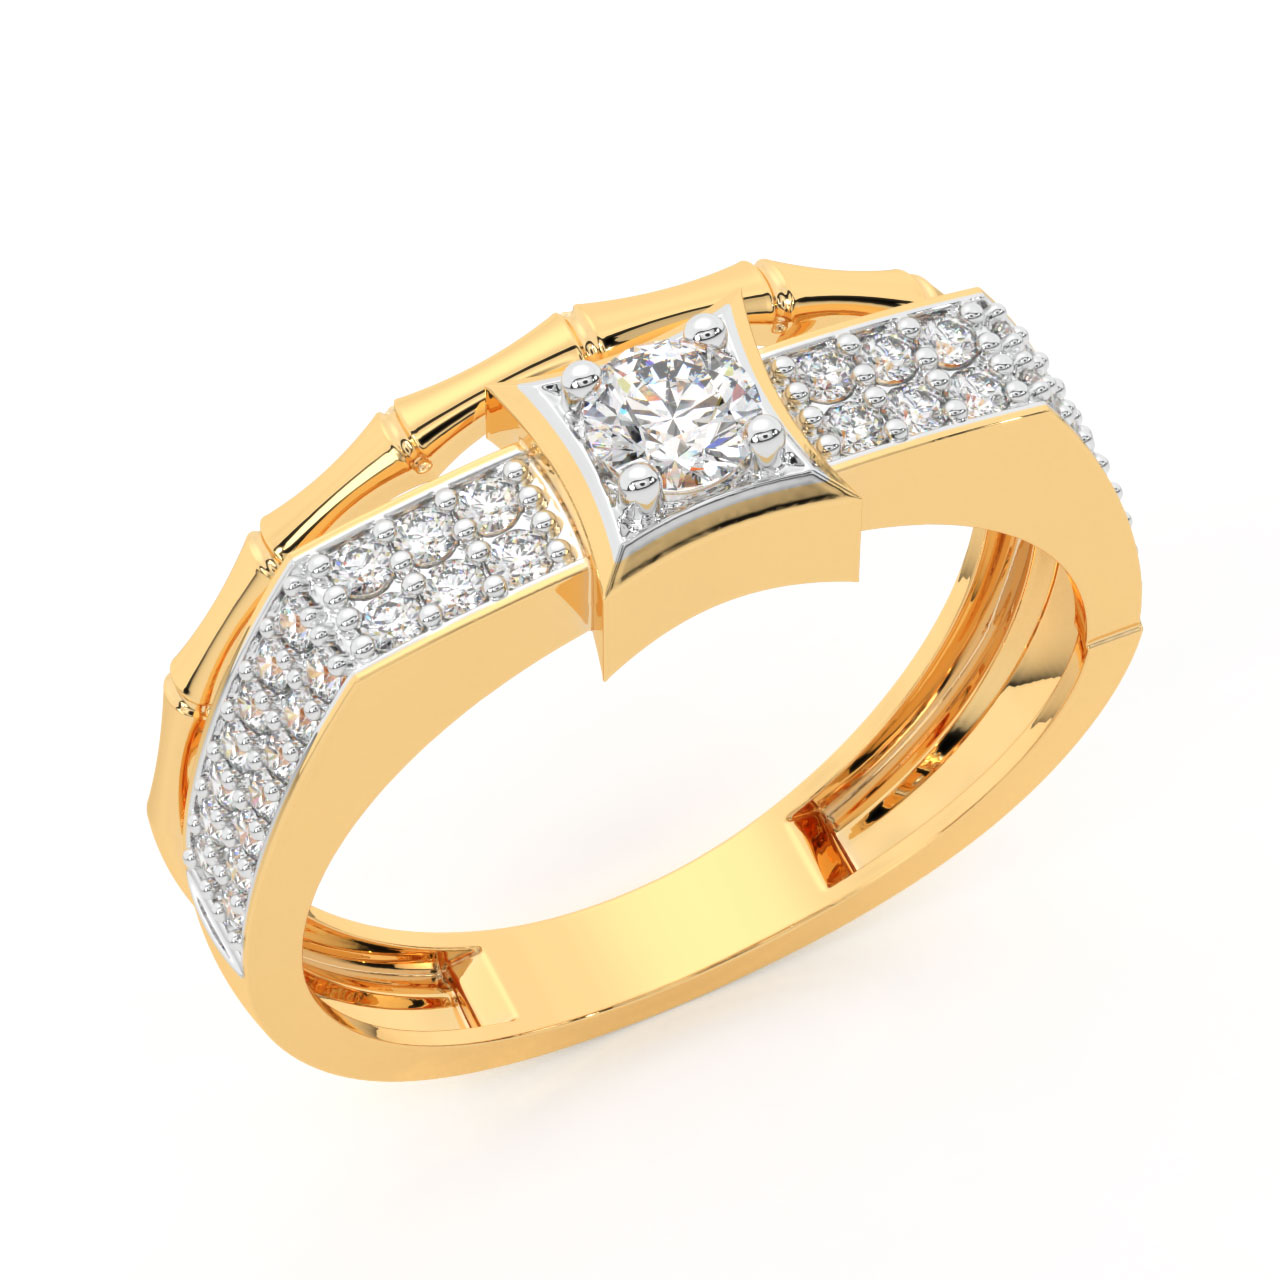 Luxury Simulated 18K Gold Diamond Engagement Ring For Men And Boys Mens  Fine Jewelry Rings In 925 Silver, Sizes 7 12 From Fashion7house, $10.27 |  DHgate.Com